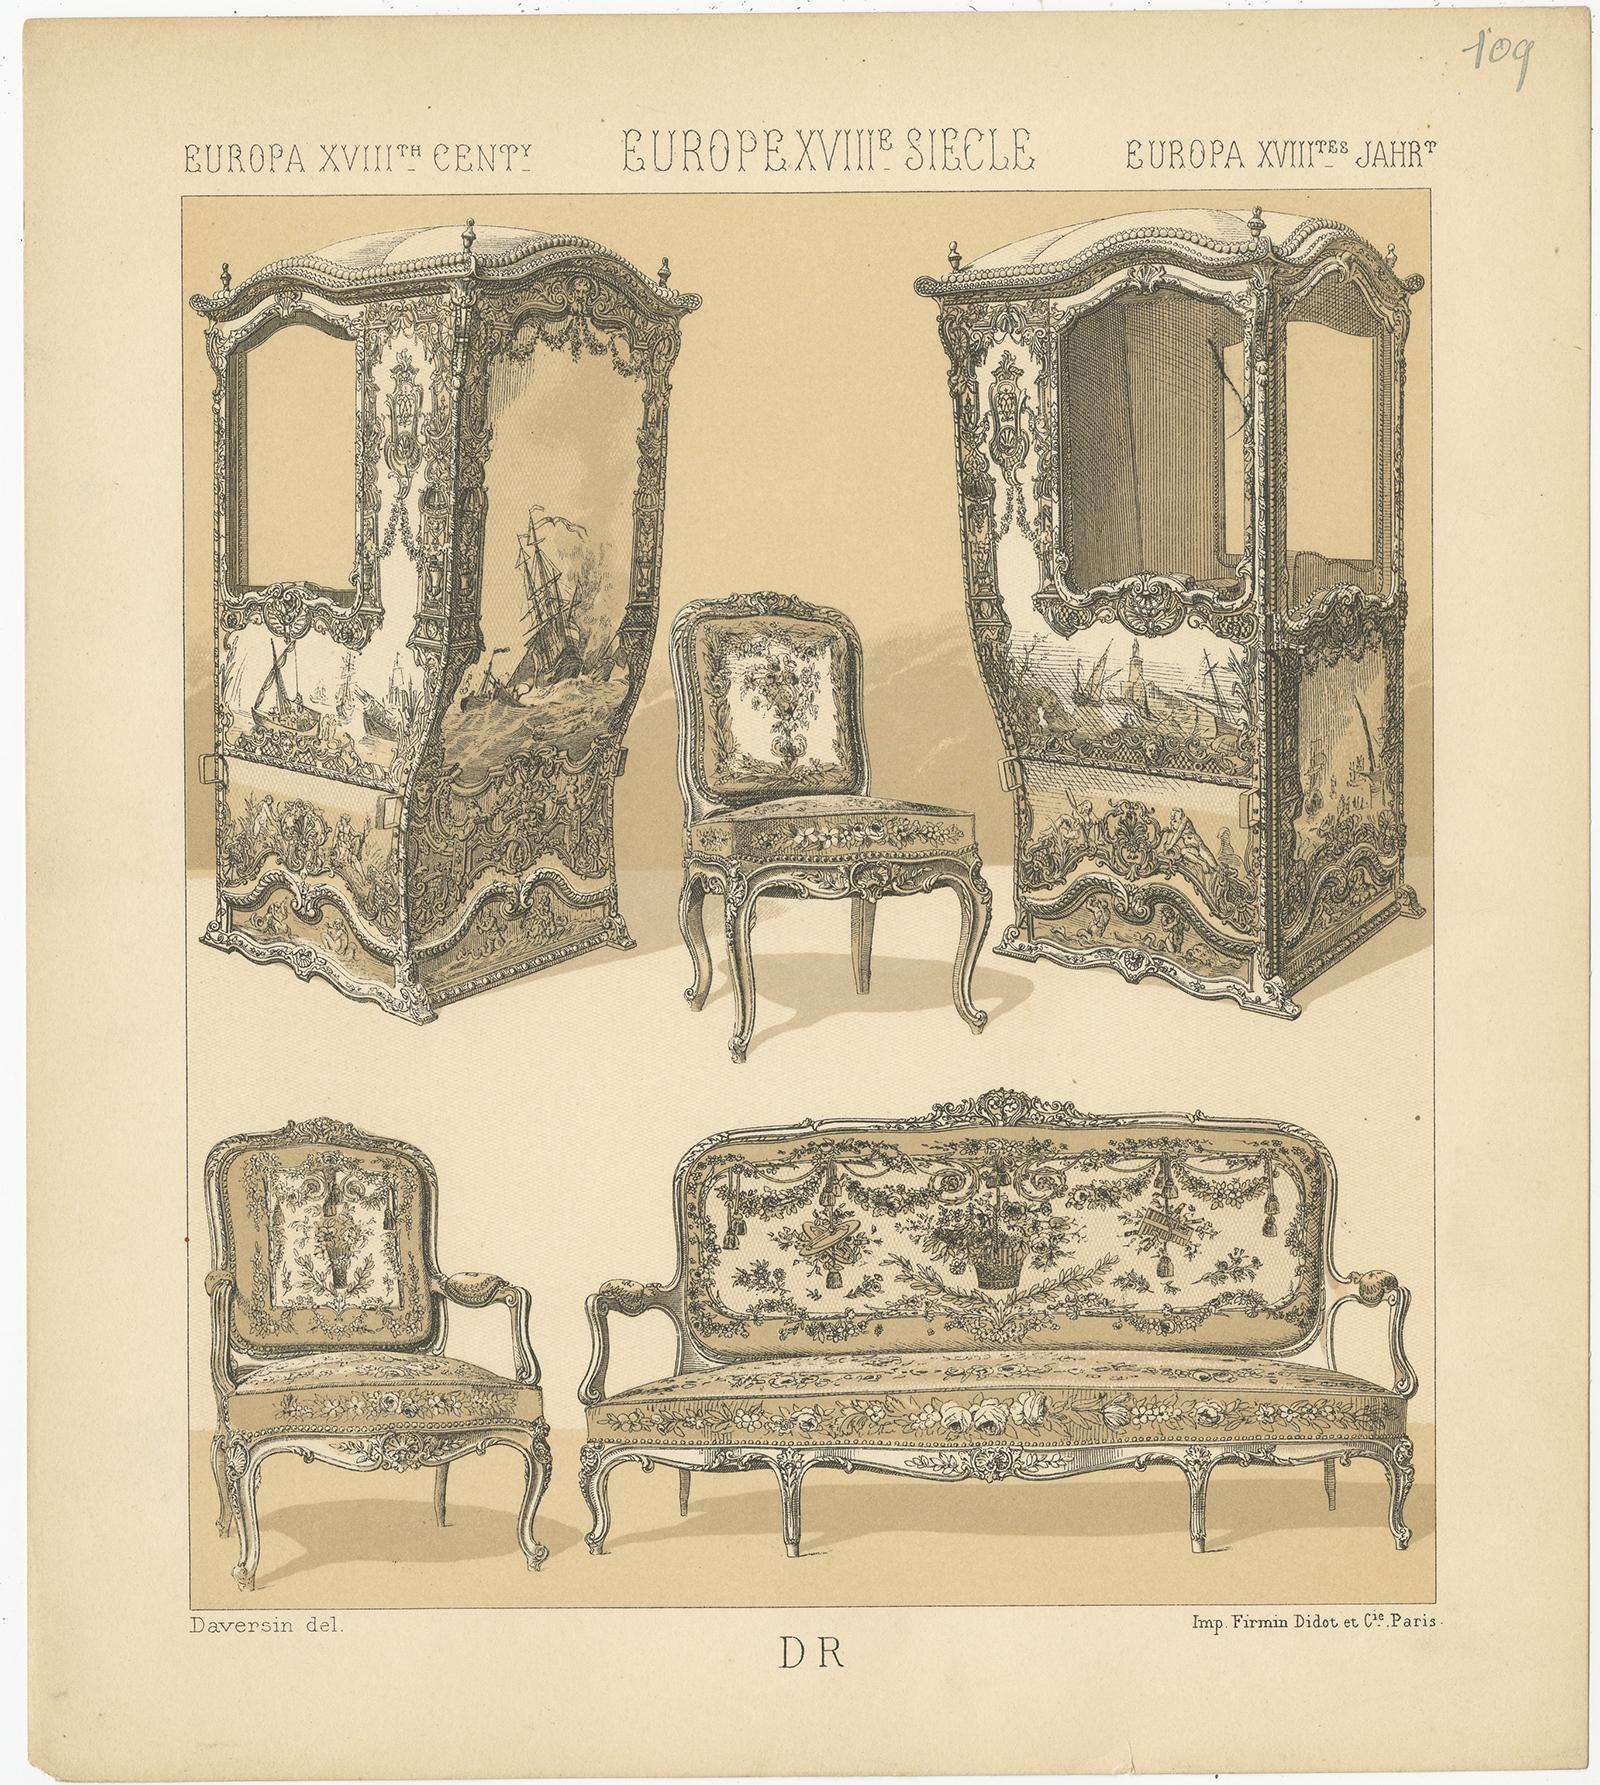 Antique print titled 'Europa XVIIIth Cent - Europe XVIIIe, Siecle - Europa XVIIItes Jahr'. Chromolithograph of European 18th century furniture. This print originates from 'Le Costume Historique' by M.A. Racinet. Published circa 1880.